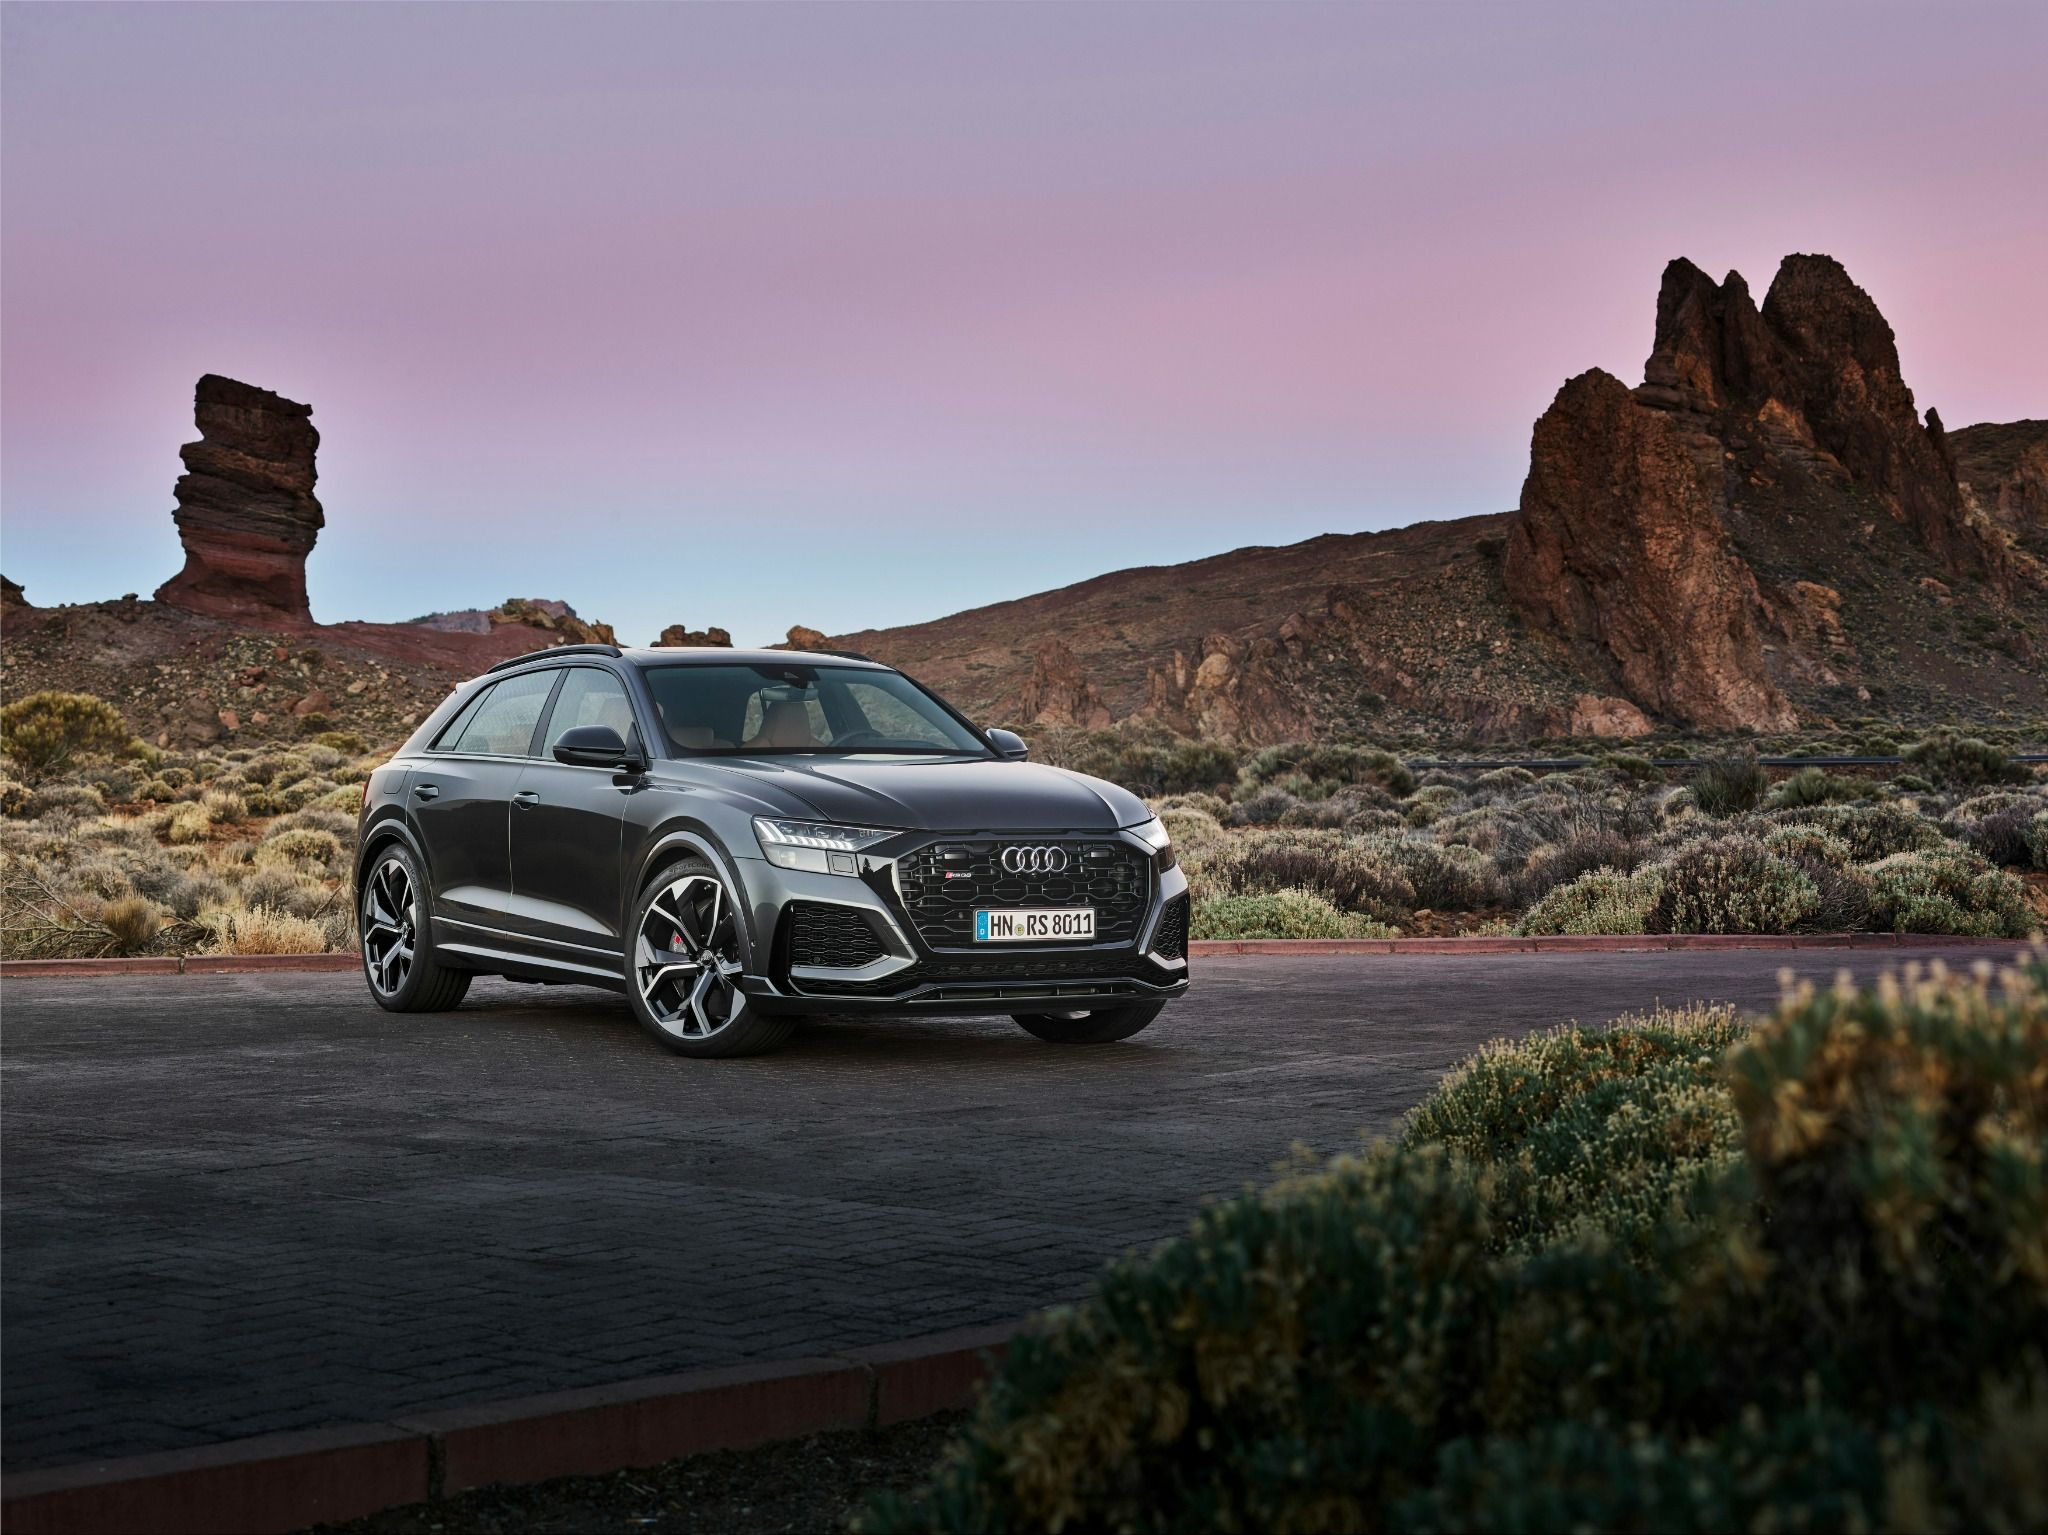 Audi RSQ8 parked between rocky mountains